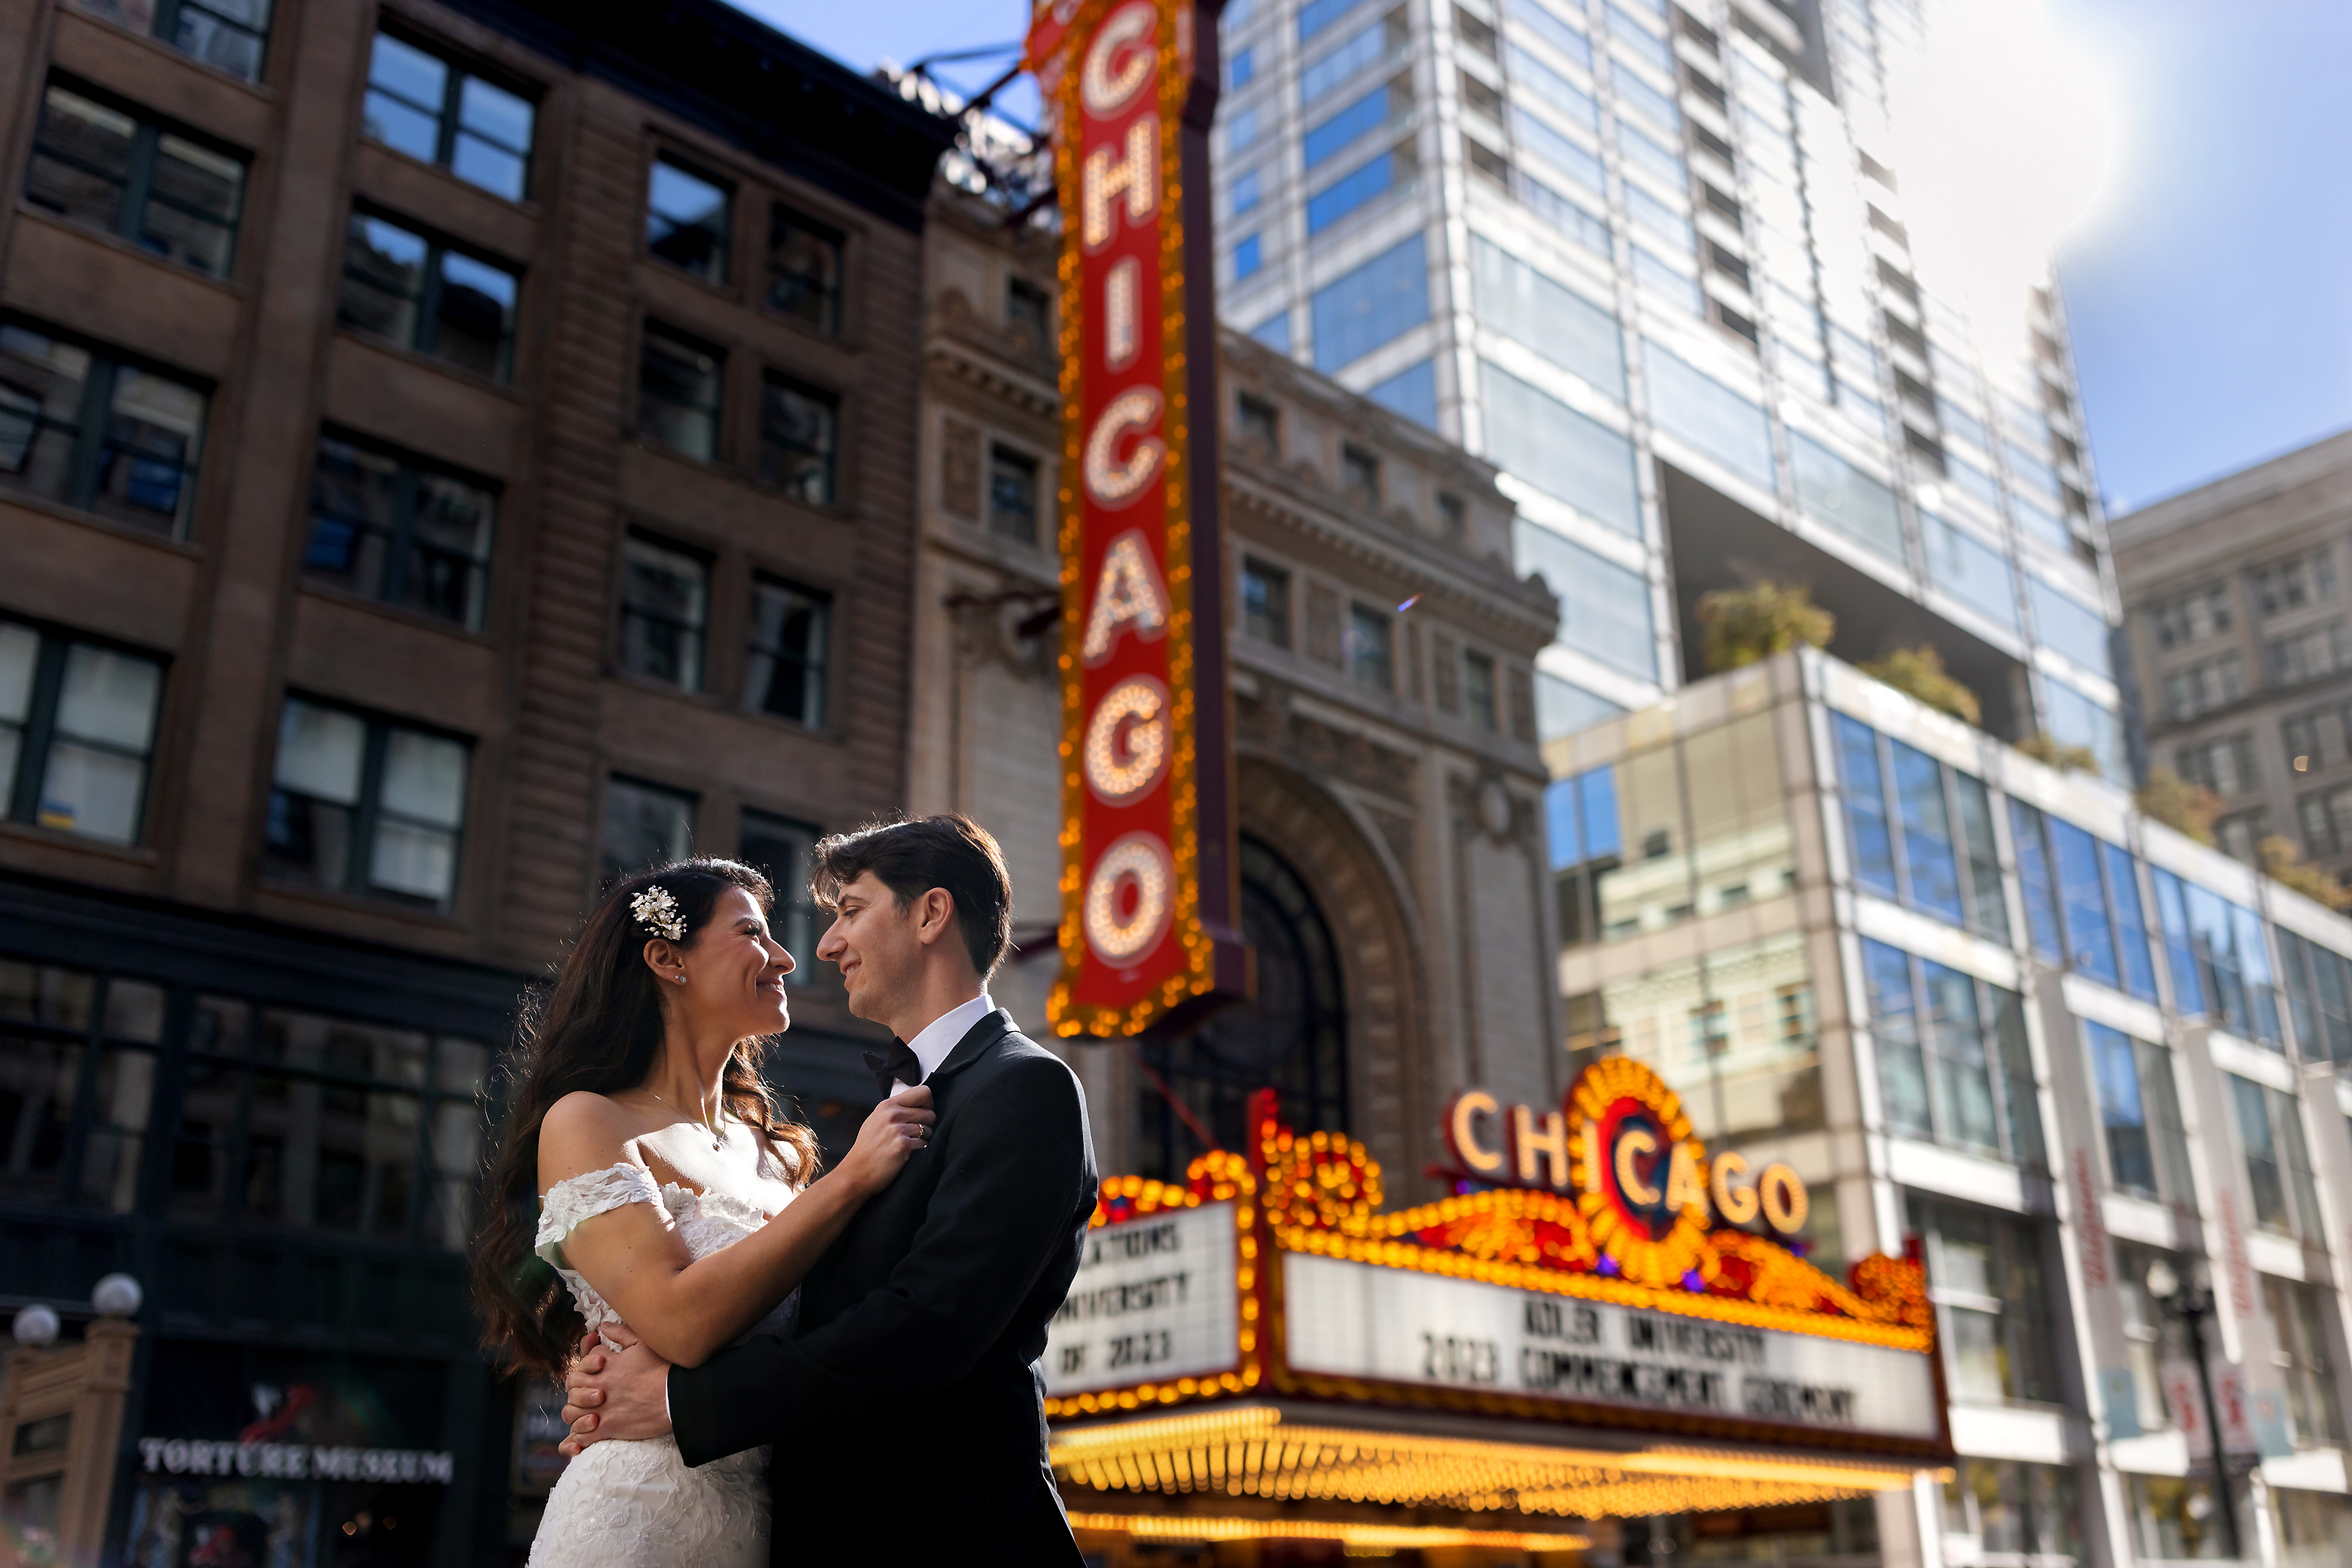 Bride and groom pose for photo in front of Chicago Theatre sign